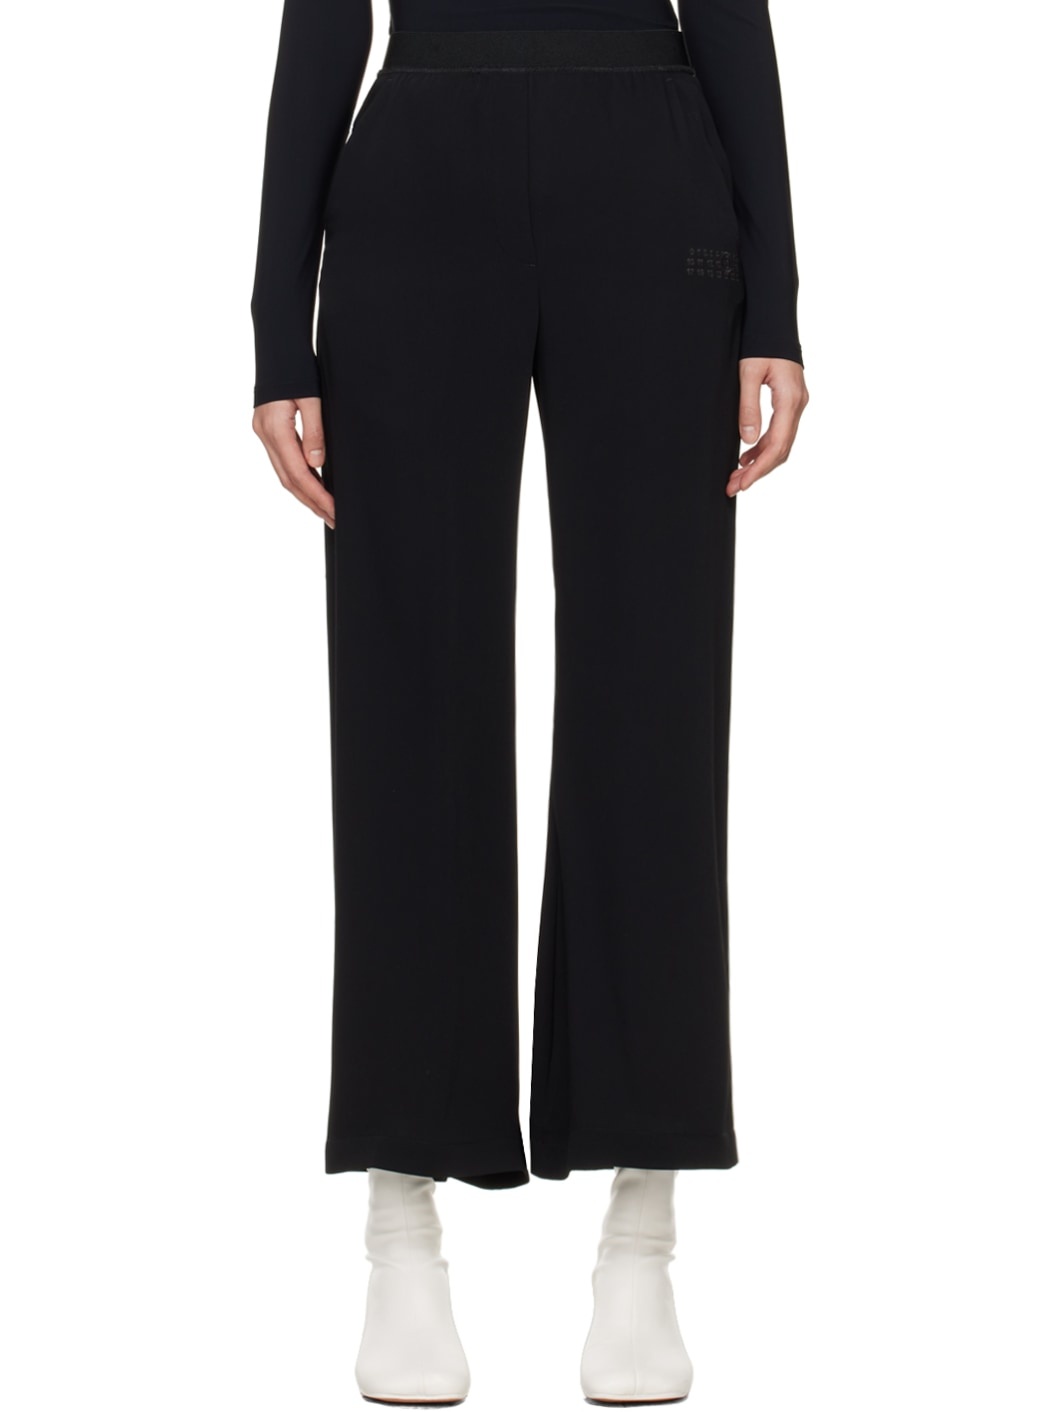 Black Embroidered Trousers - 1